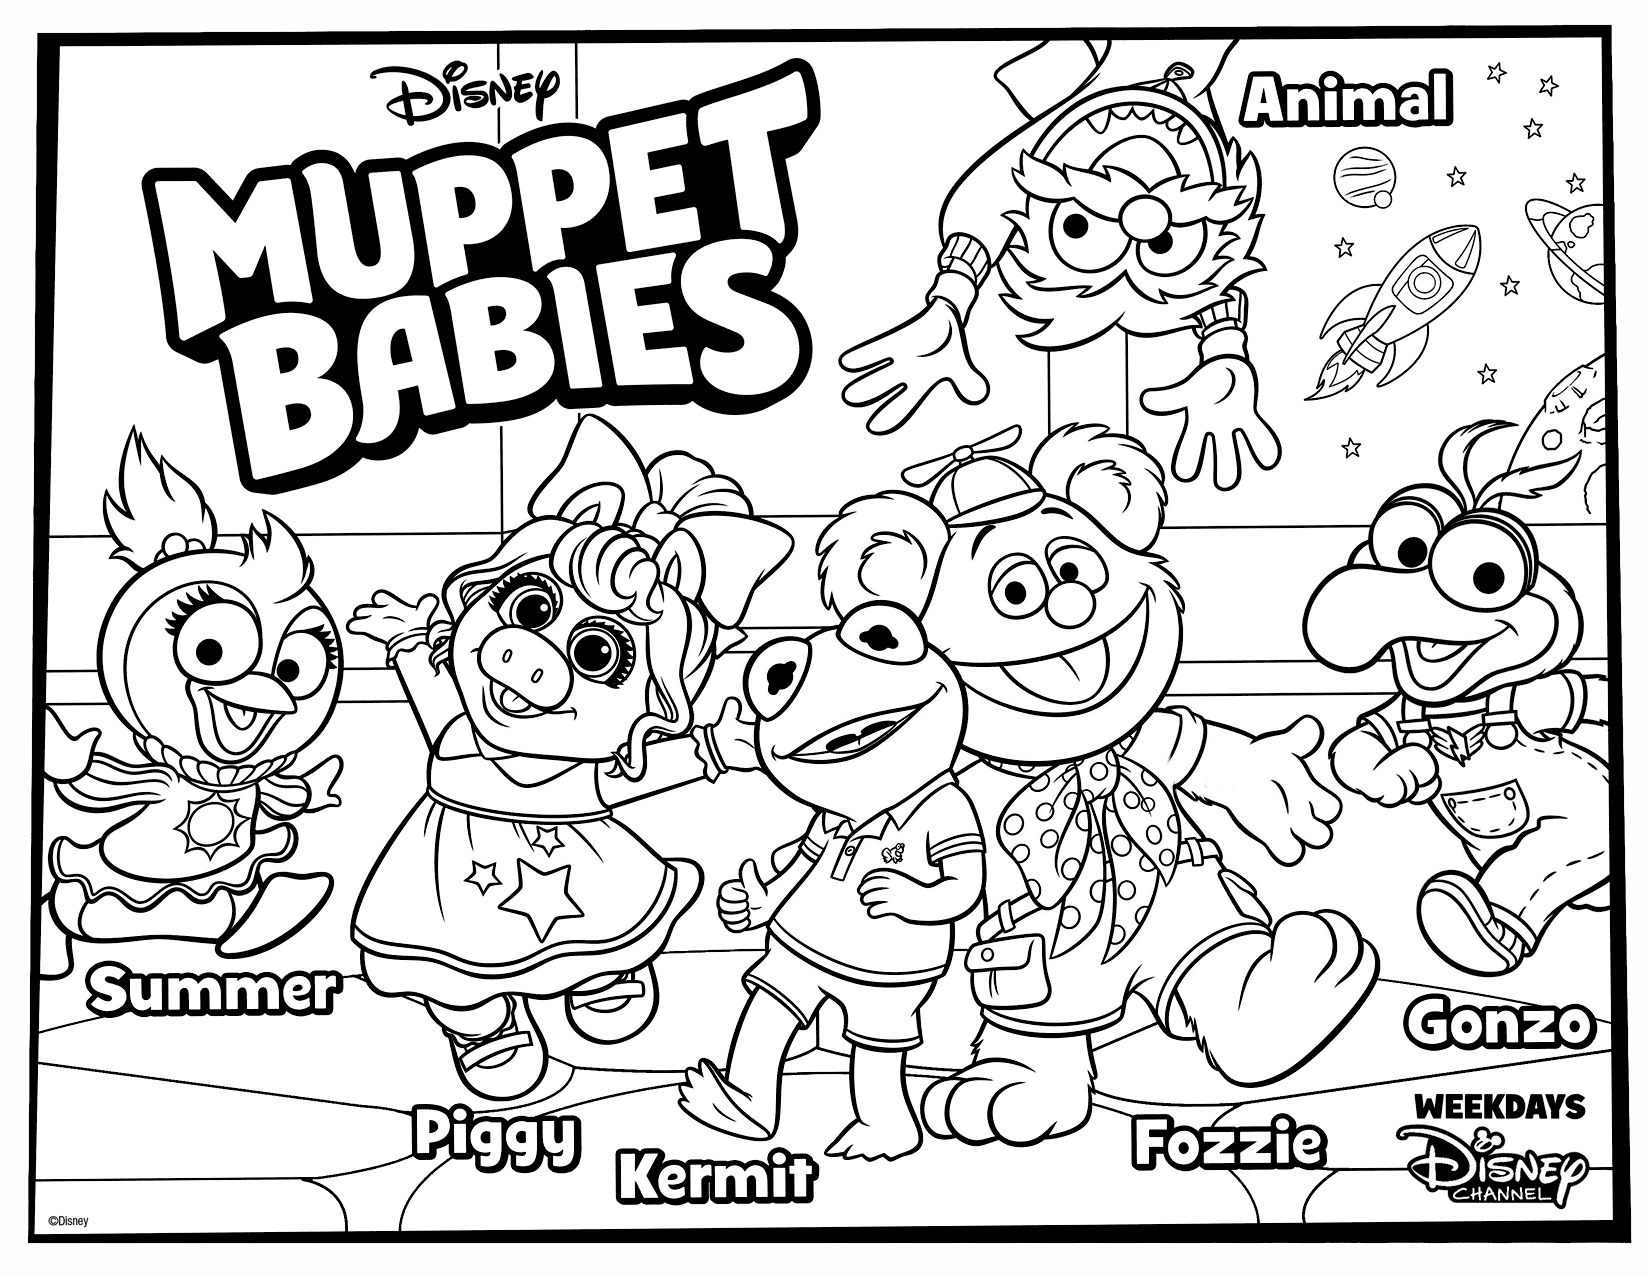 Muppet Babies Character Poster Coloring Page